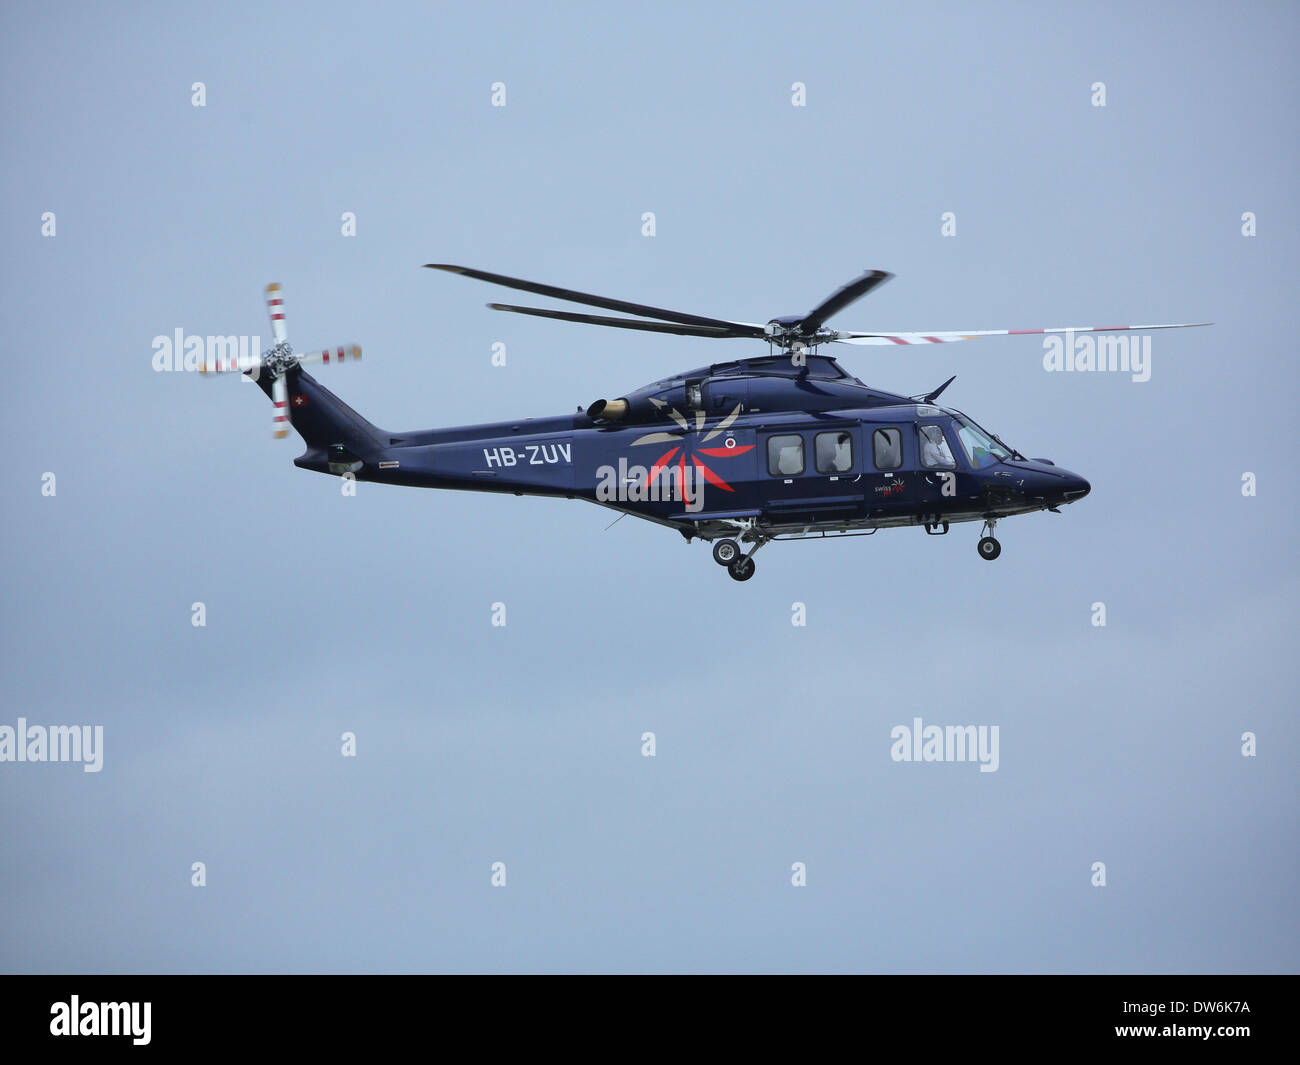 An AgustaWestland AW139 helicoptor owned by SwissJet at the 2012 Farnborough International Airshow Stock Photo